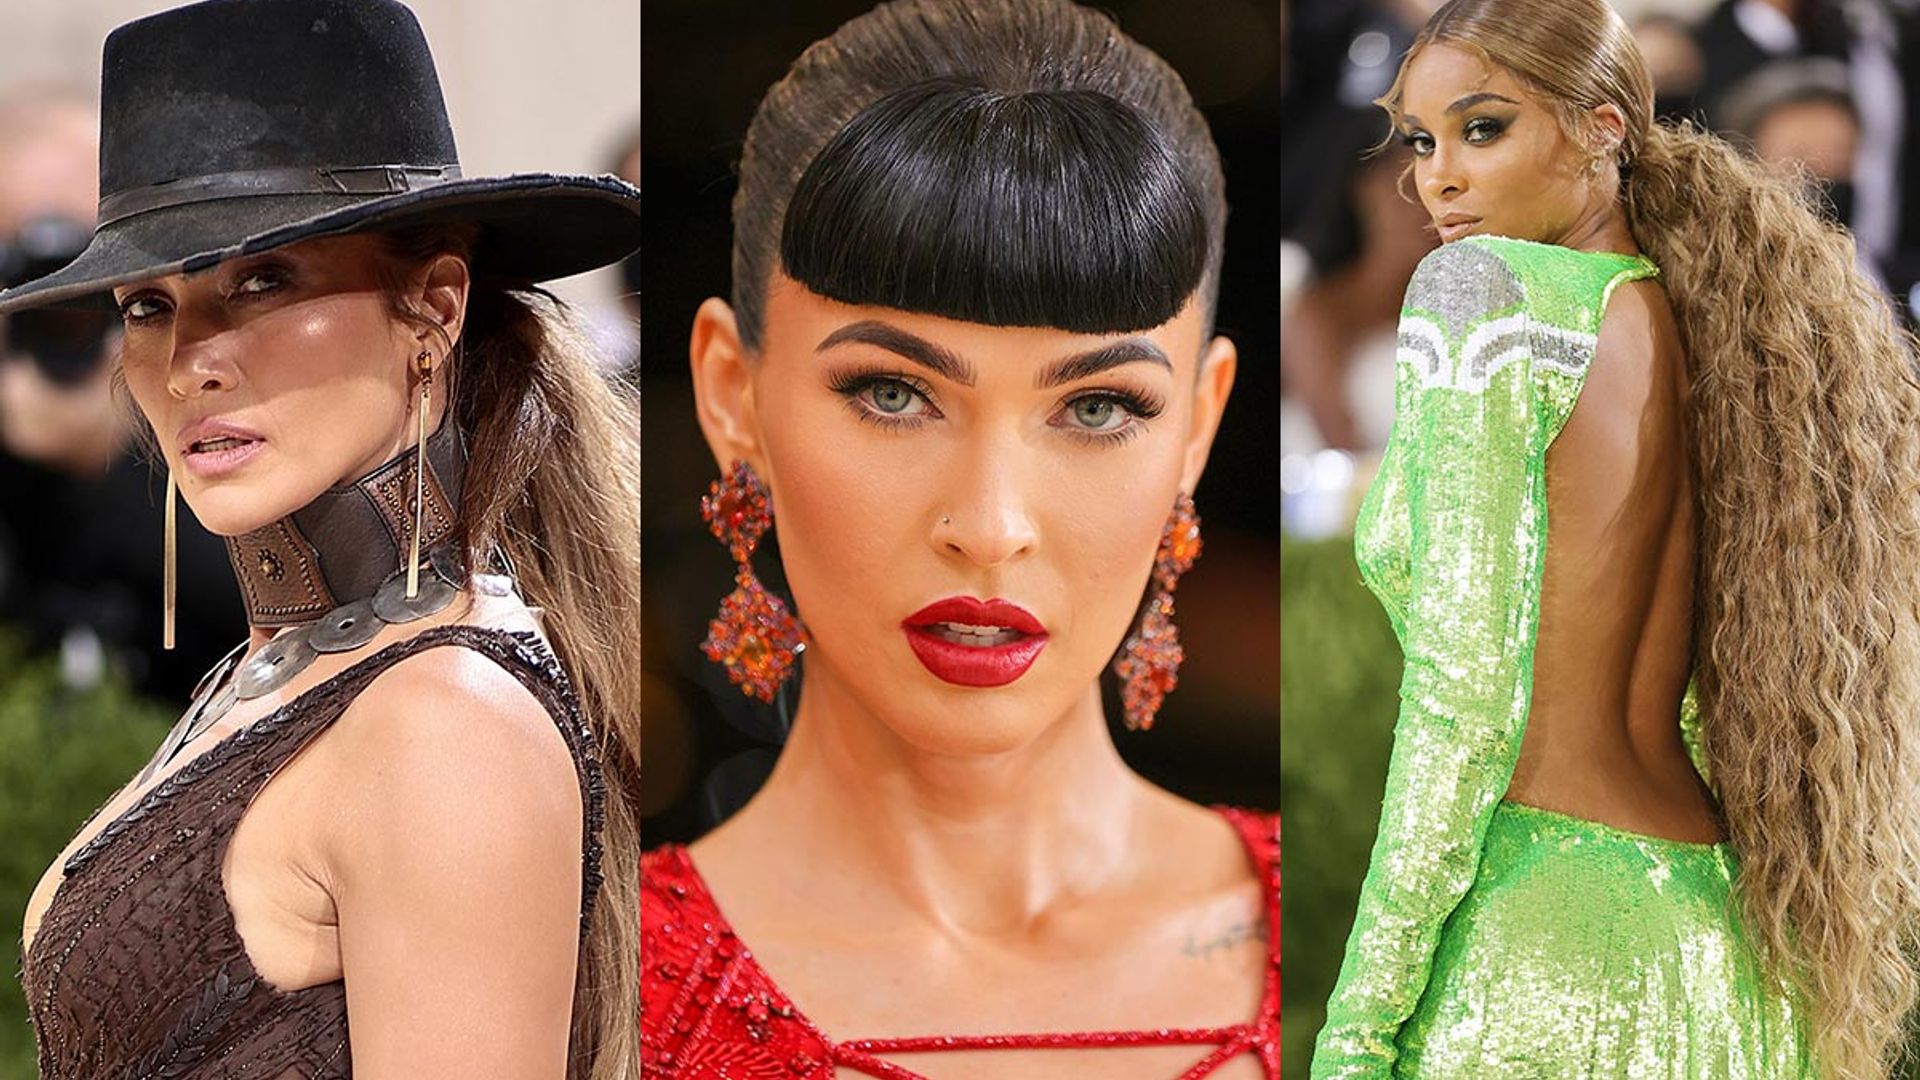 The most stunning beauty looks from the Met Gala 2021